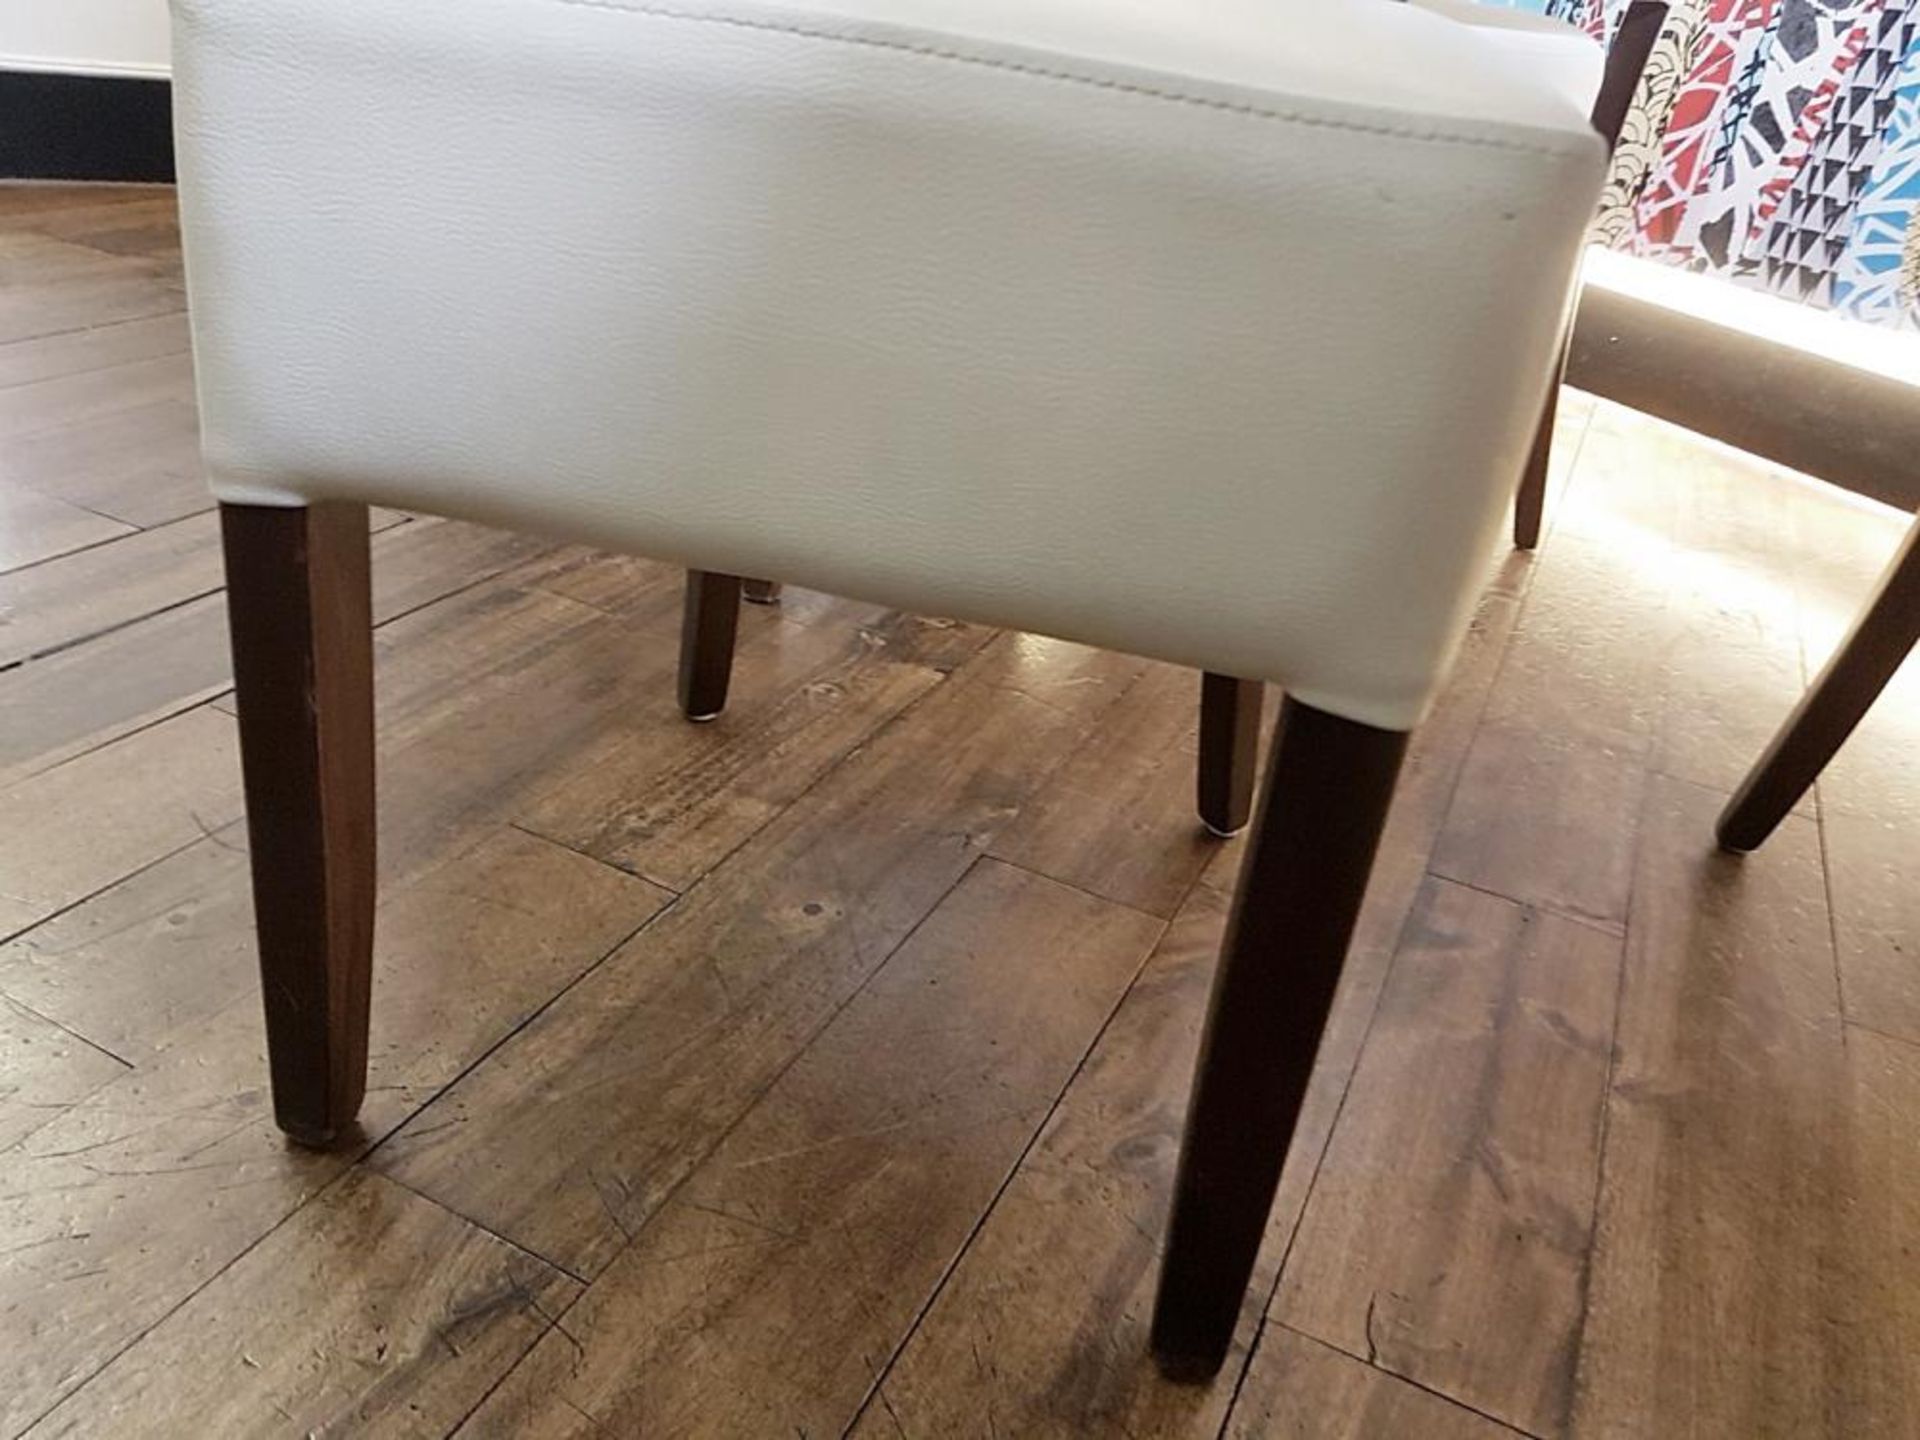 6 x Upholstered Restaurant Bar Chairs - Covered In A Light Cream Faux Leather - Image 7 of 7